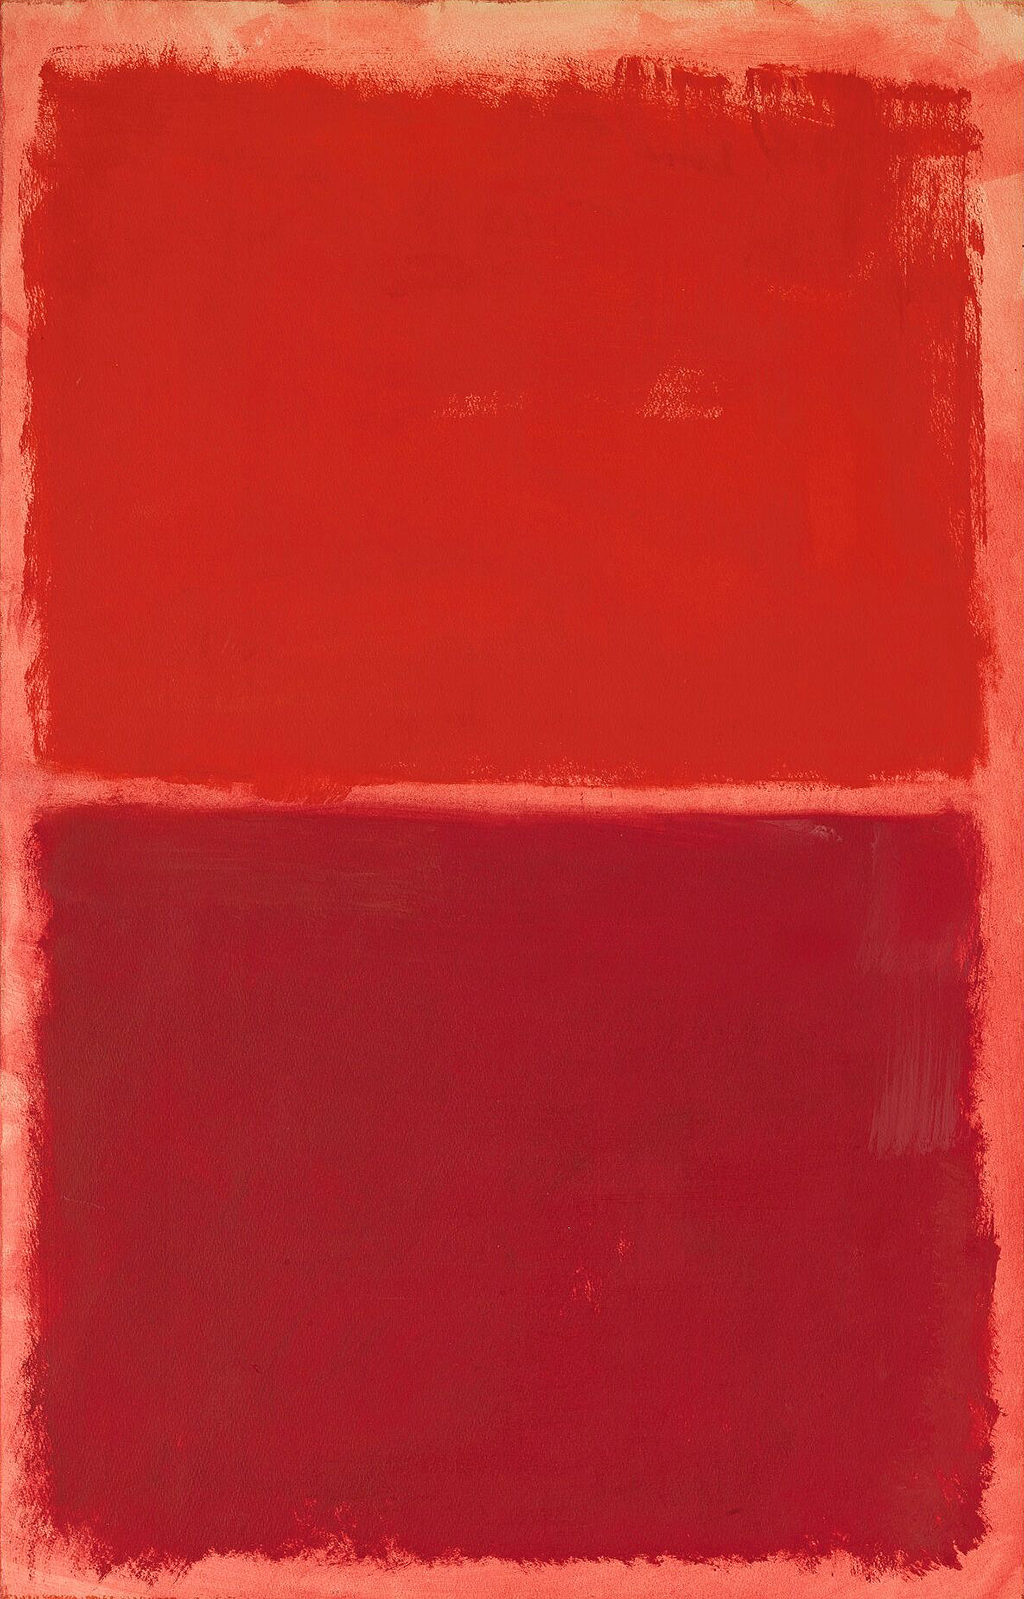 Untitled (Red) by Mark